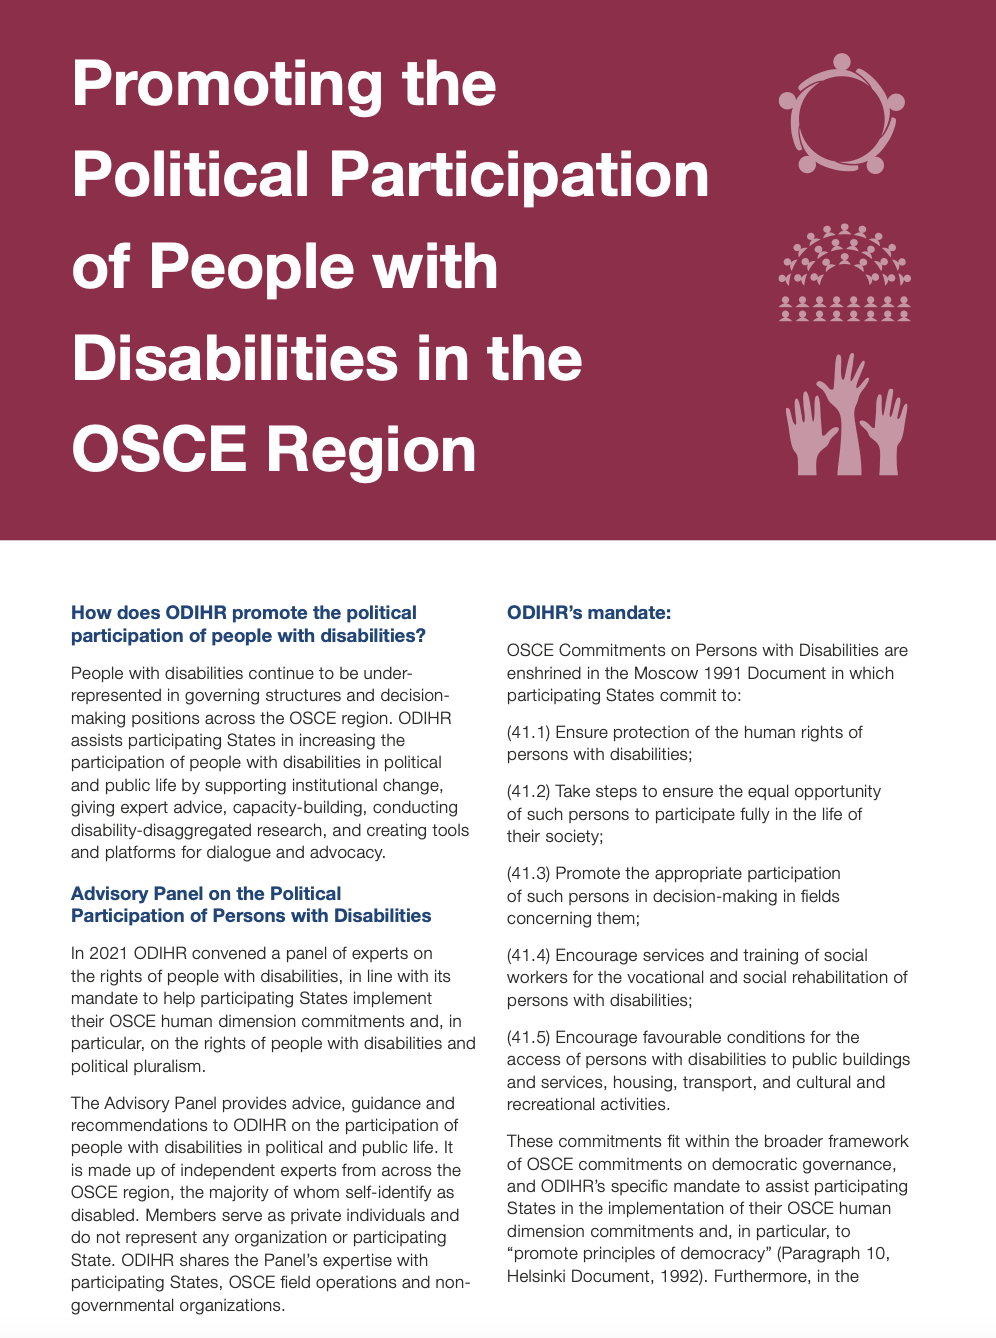 Promoting the Political Participation of People with Disabilities